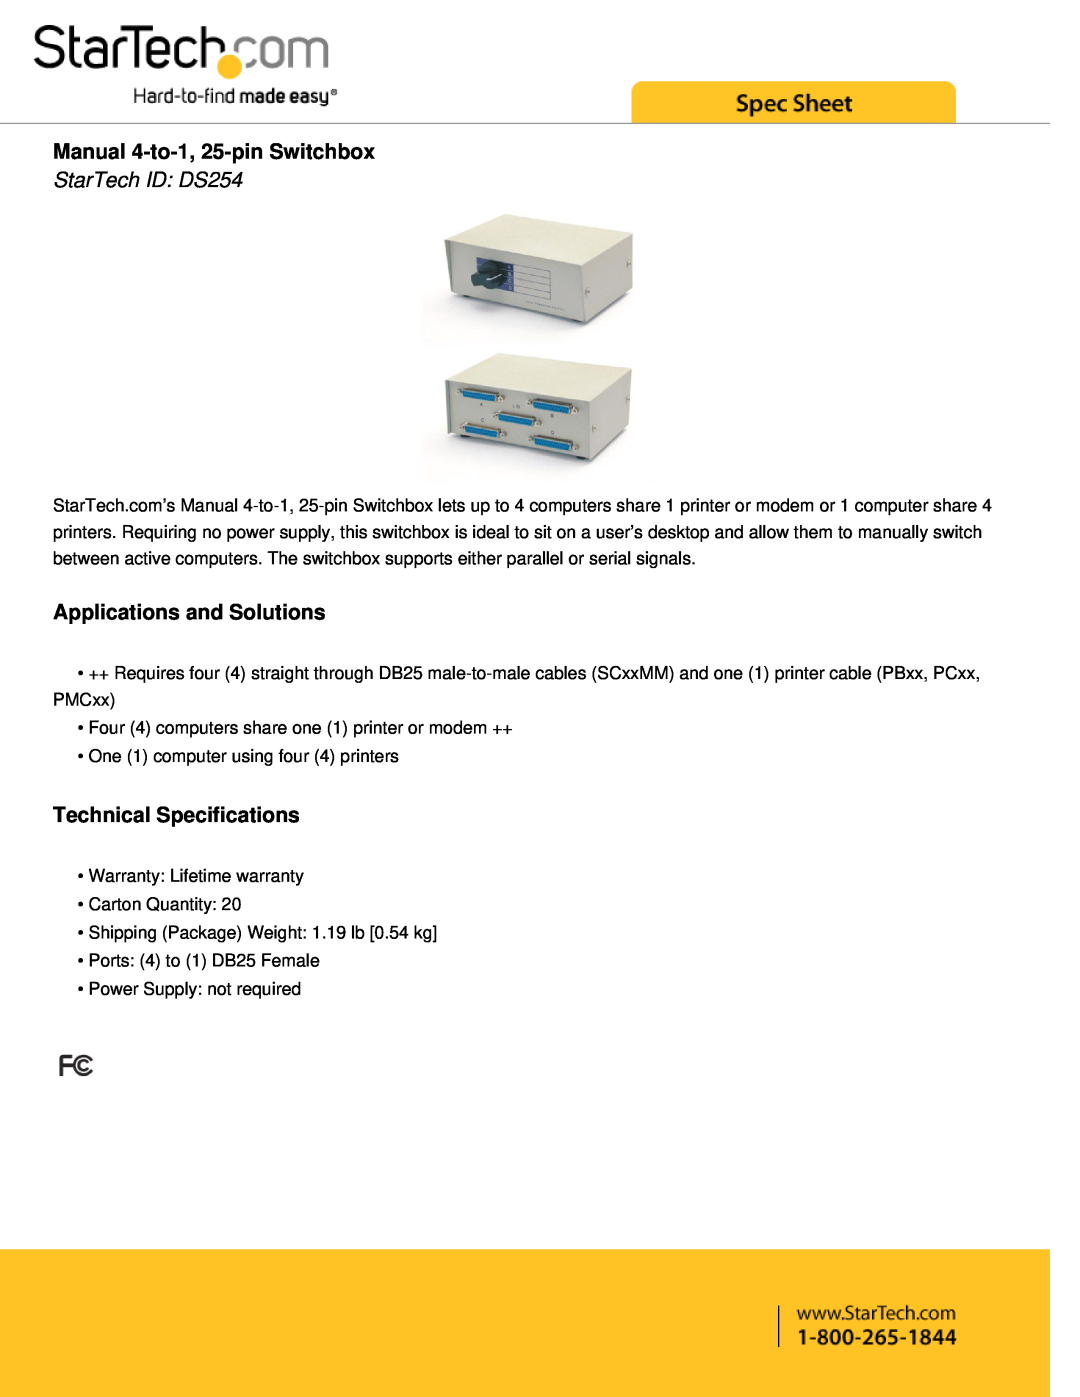 StarTech.com technical specifications Manual 4-to-1, 25-pin Switchbox, StarTech ID DS254, Applications and Solutions 